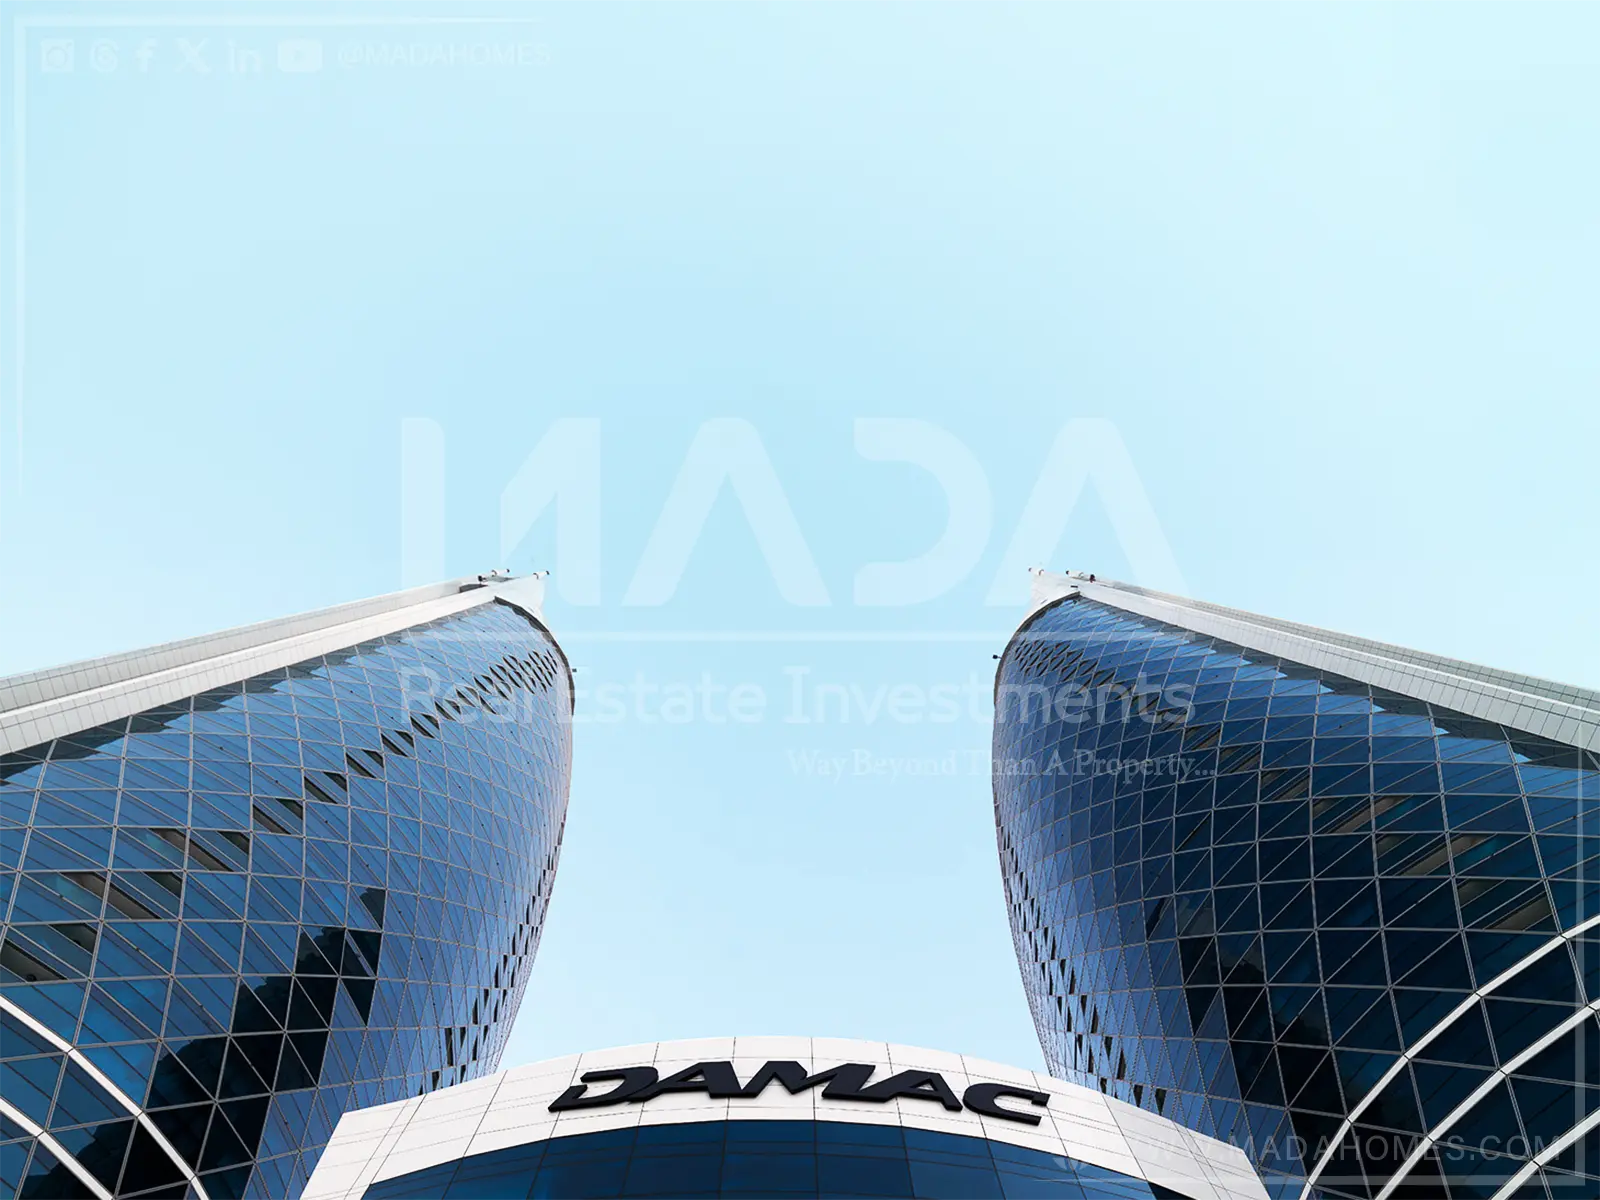 What is the location of Damac Properties Dubai?